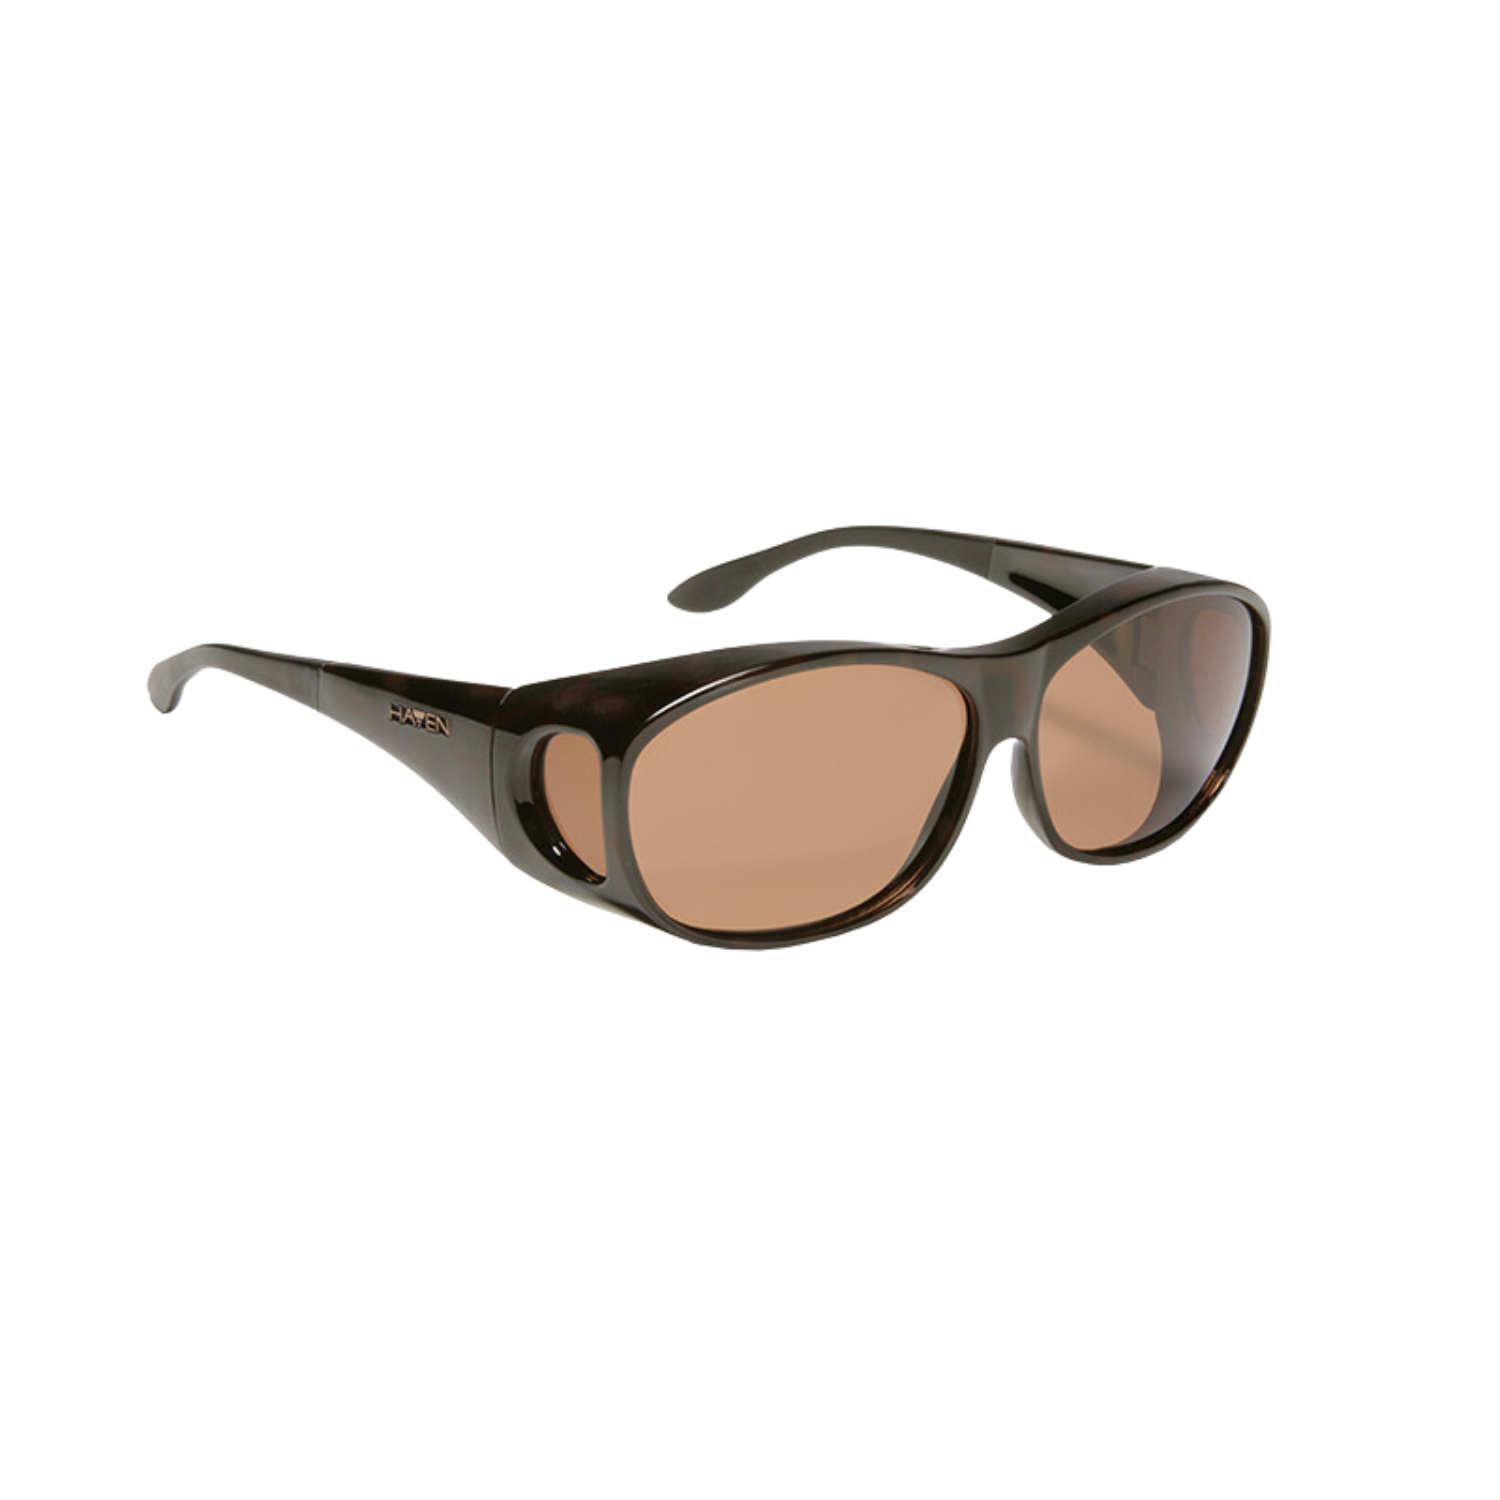 Image of the Haven Meridian polarized fit-over sunglasses with amber tint and brown frames.